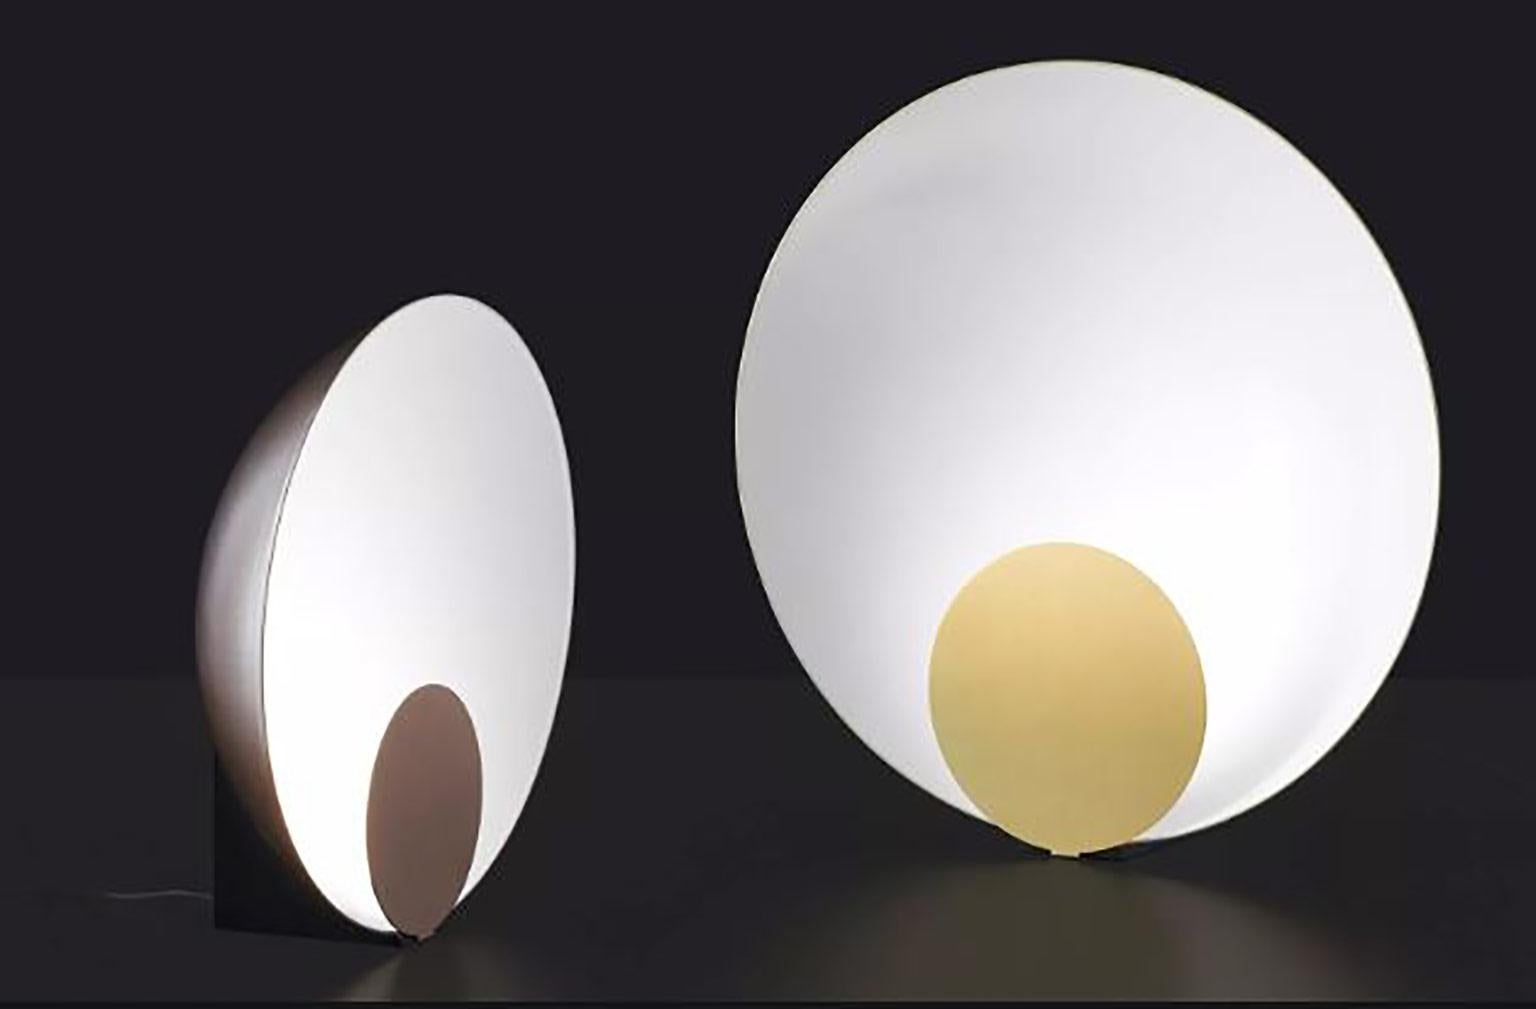 Siro table lamp by Marta Perla for Oluce. Siro gets its name from the bright star 